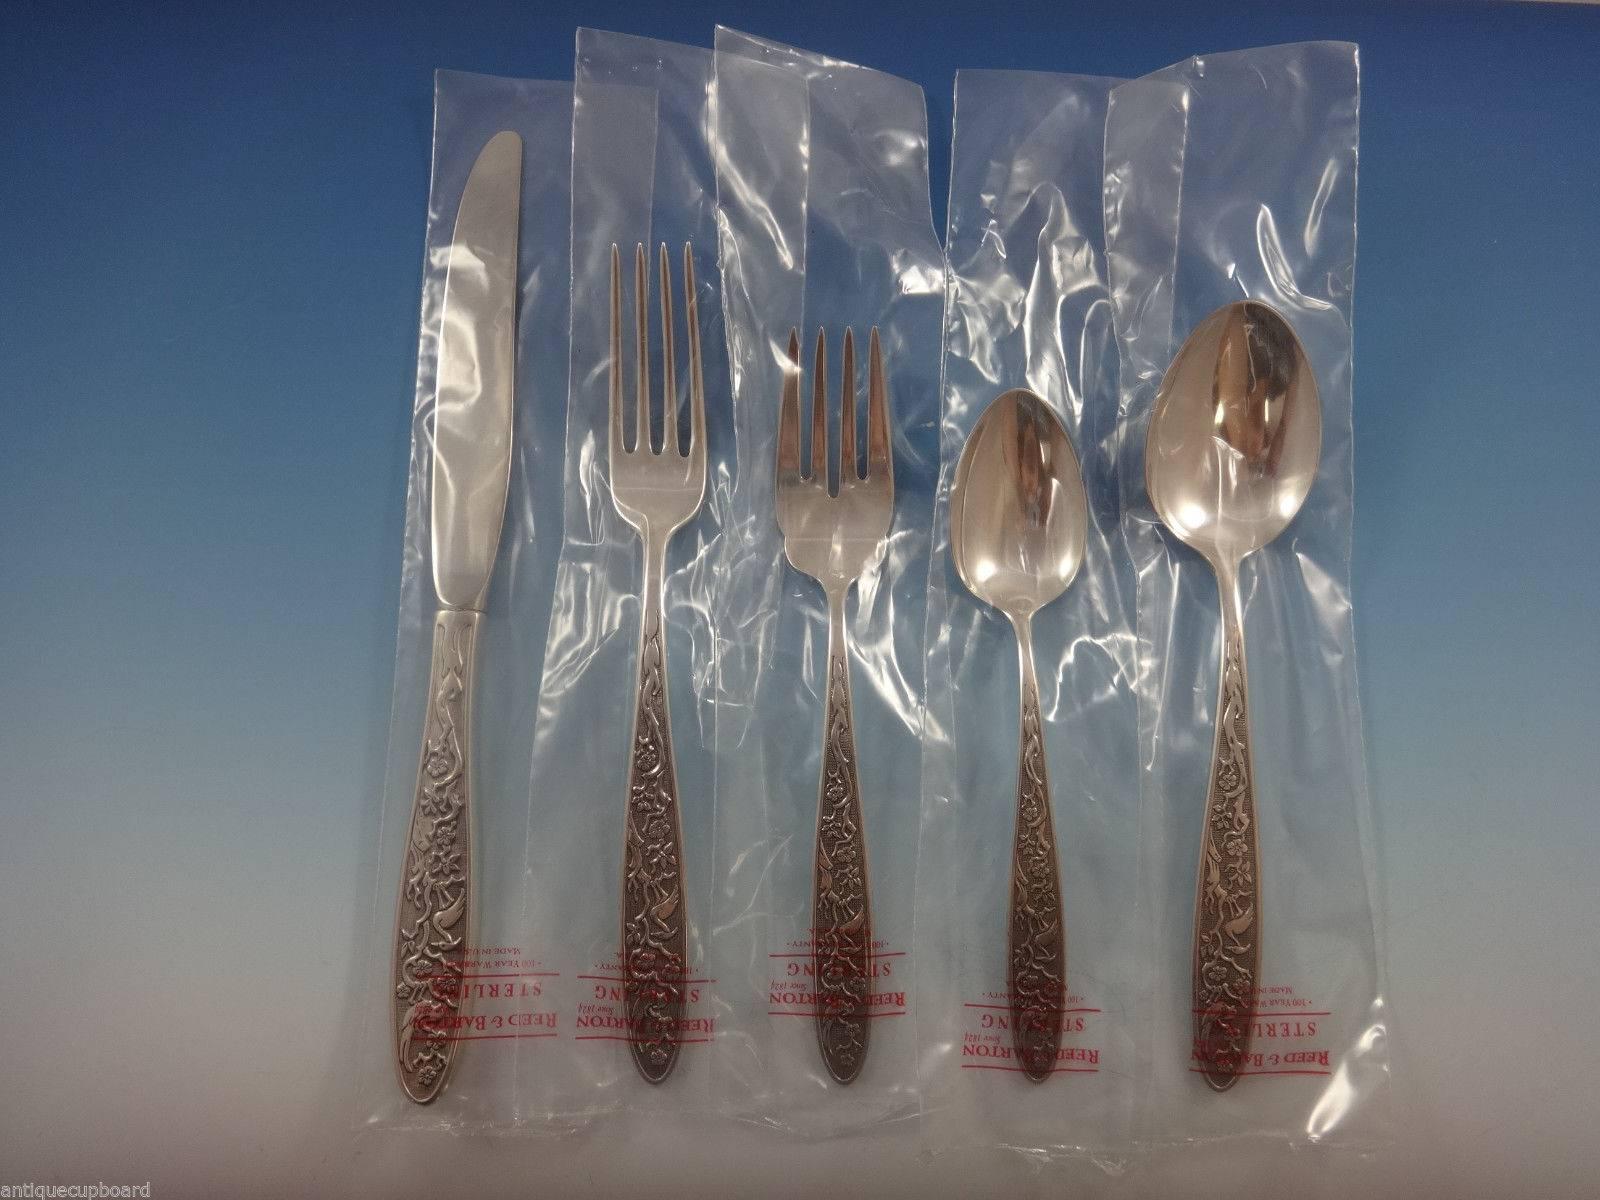 Rare Tree of Life by Reed & Barton sterling silver flatware set of 64 pieces. This pattern features a Japanese cherry blossom tree with birds against a matte background. Unique and beautiful Japanesque motif! This set includes:

12 knives, 9